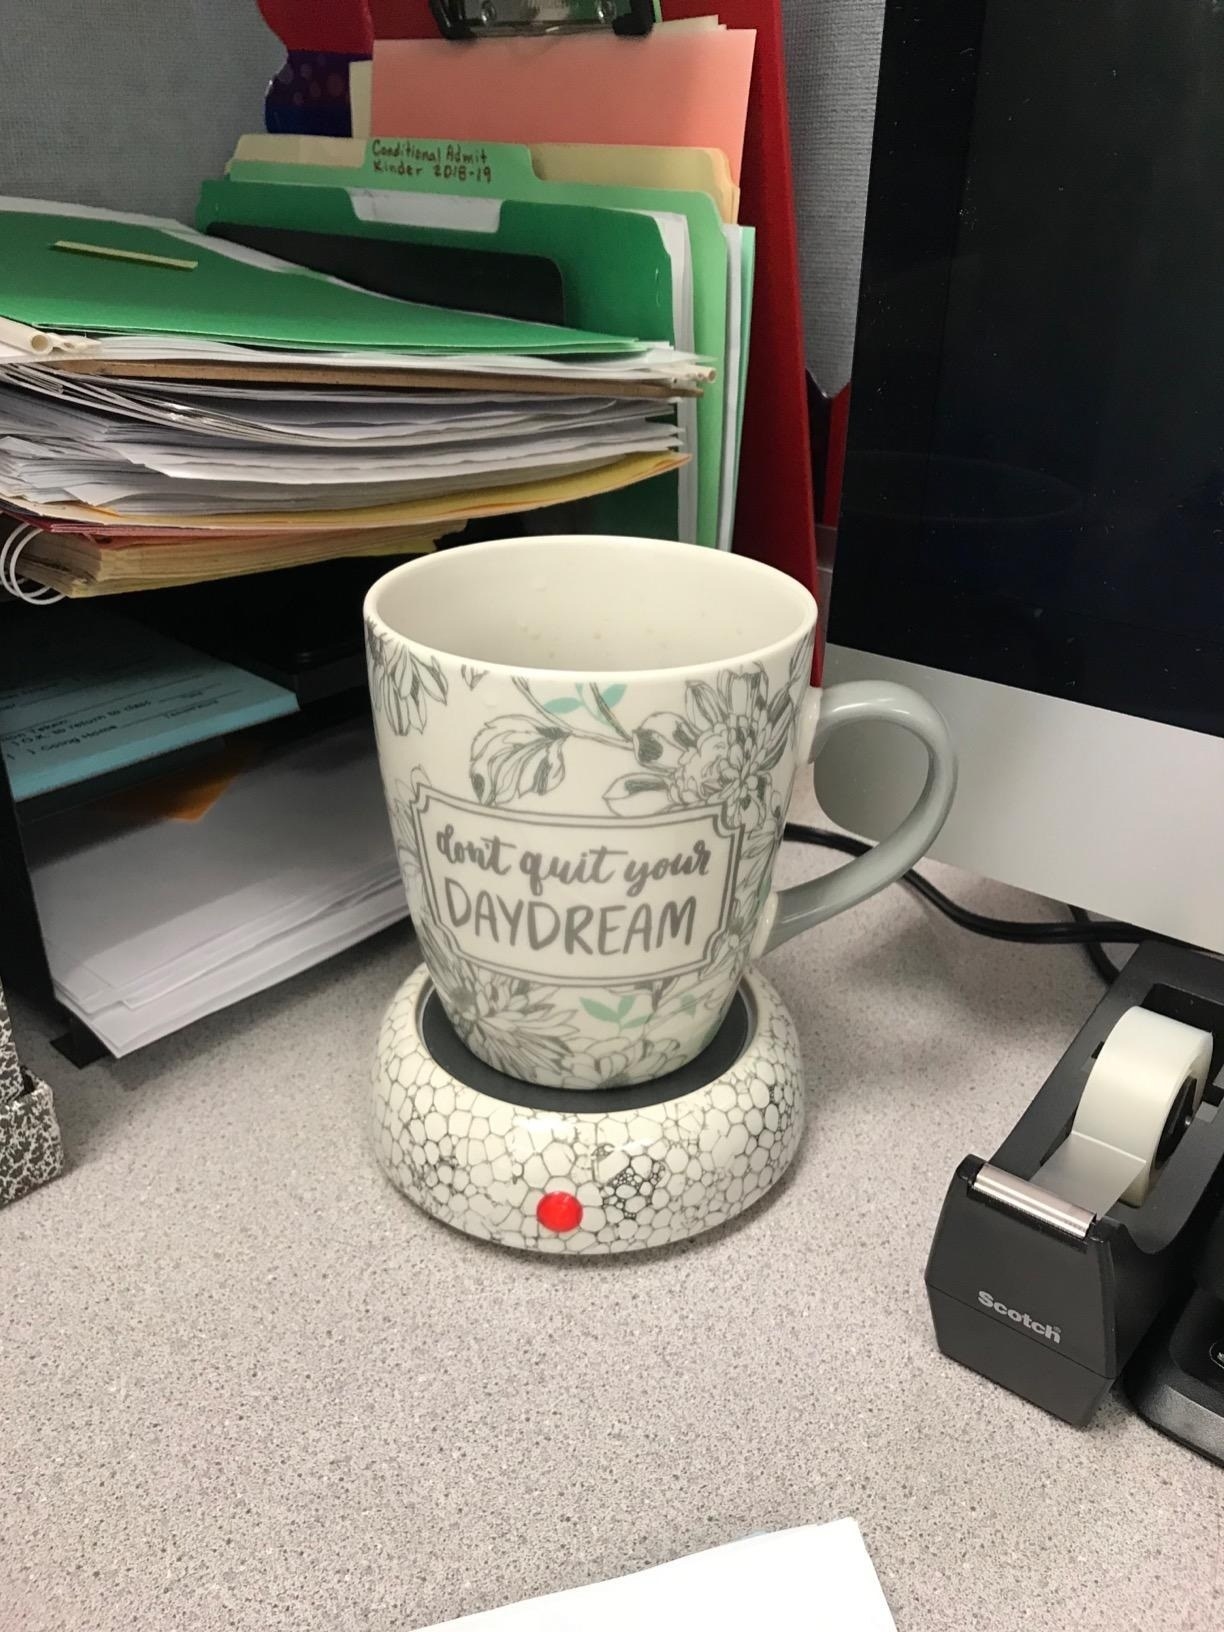 reviewer image of a mug sitting atop the mug warmer which sits on a desk